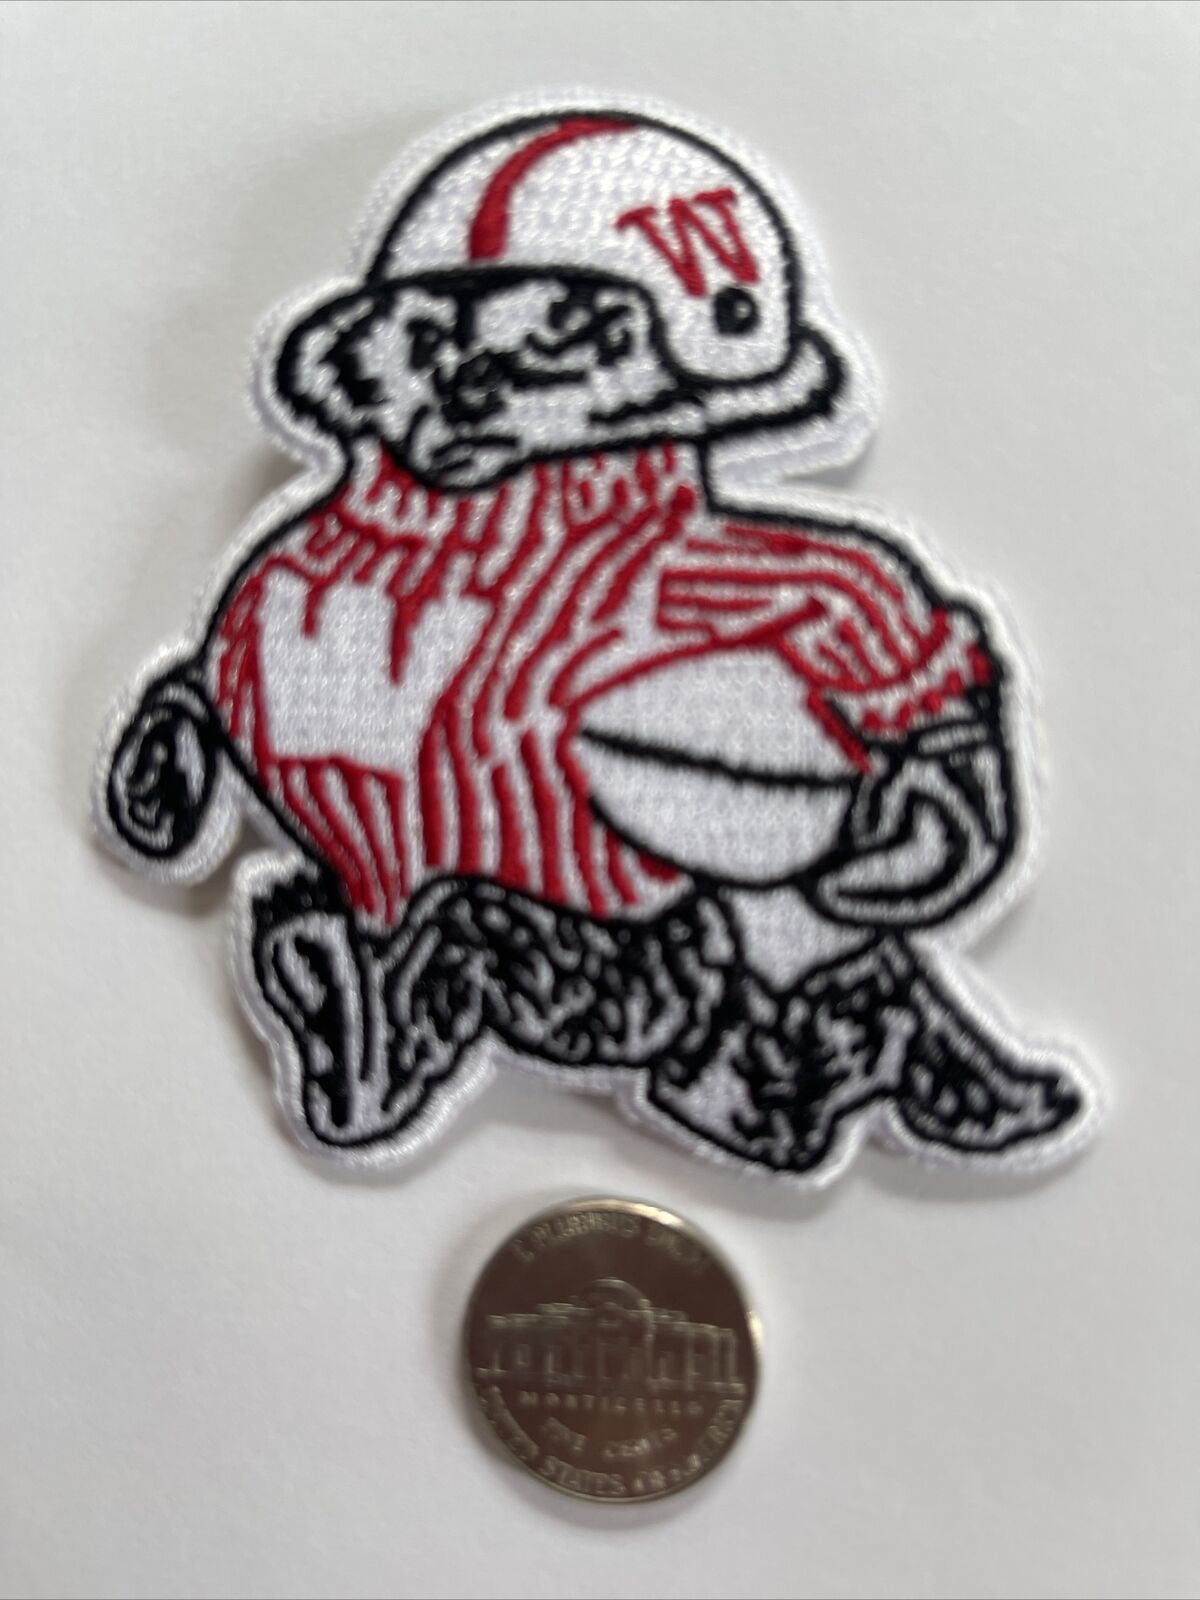 WISCONSIN U Wisconsin Badgers Vintage Embroidered Iron on Patch NCAA 3” X 2.5”